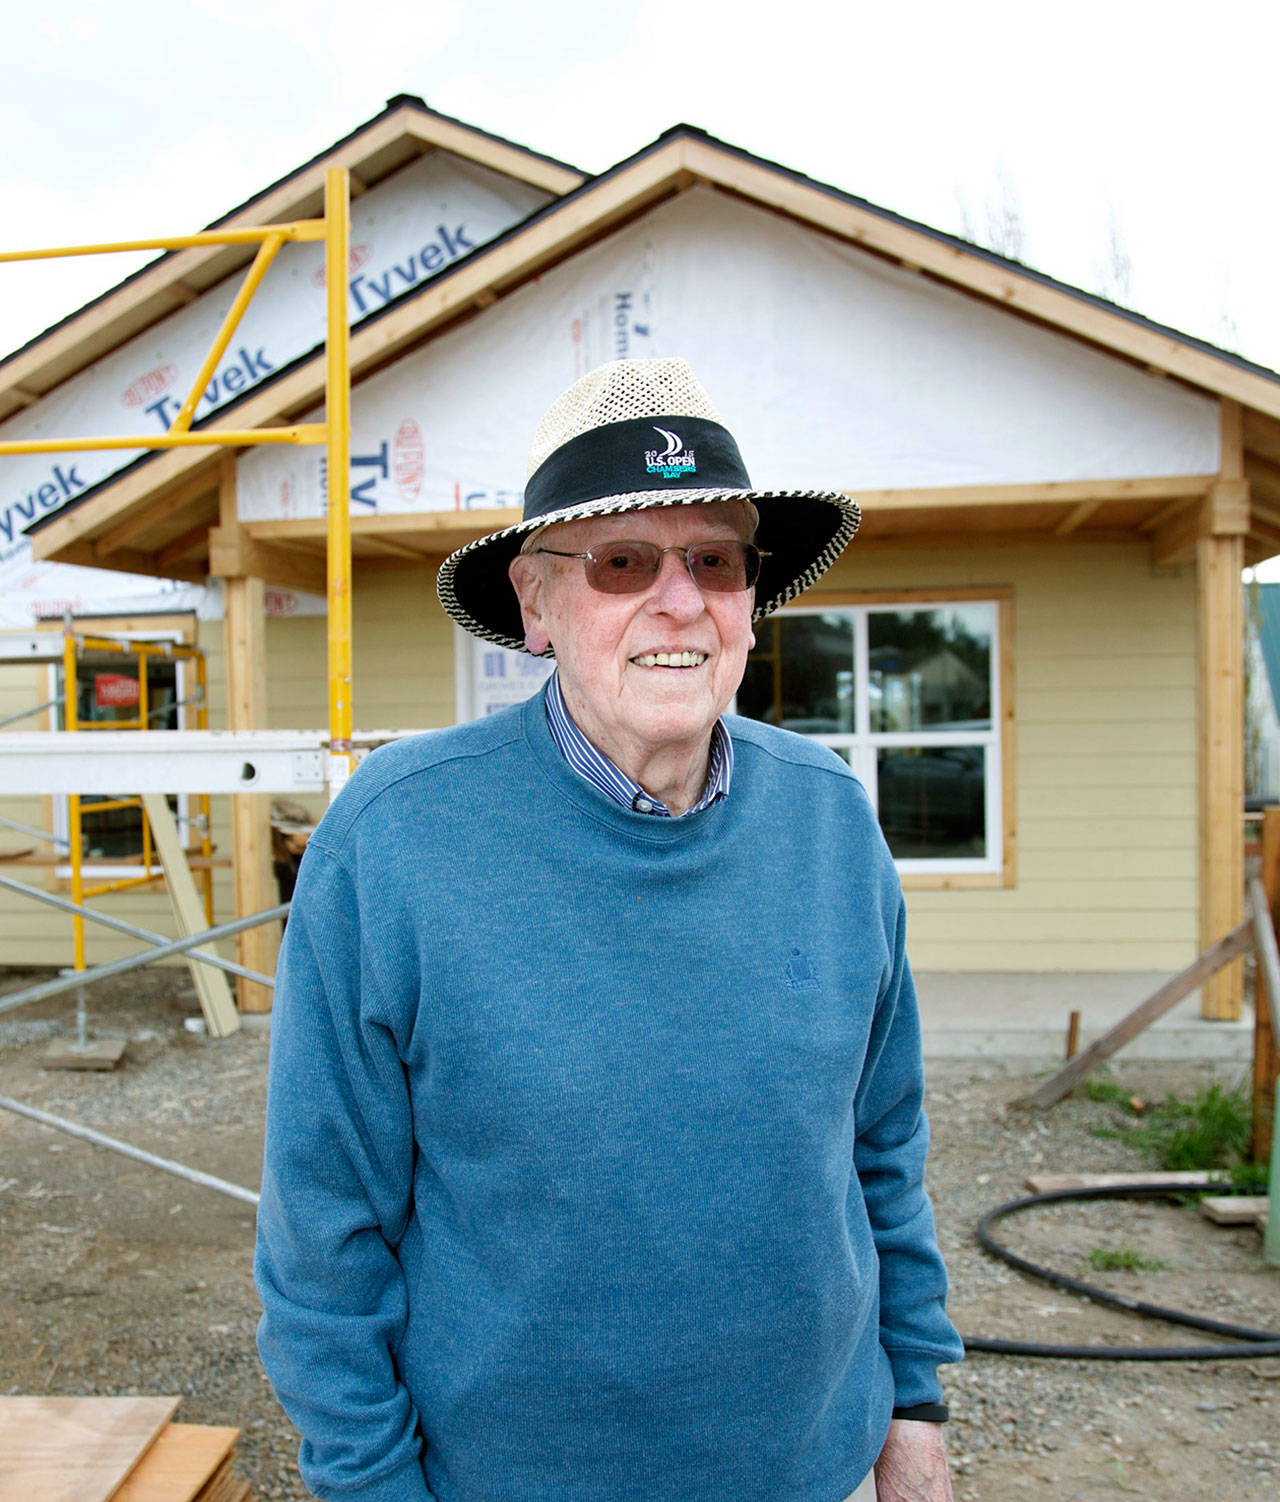 2017 Heart of Service award winner Jack Randall at a Habitat for Humanity construction site in Port Townsend. (Steve Mullensky/for Peninsula Daily News)